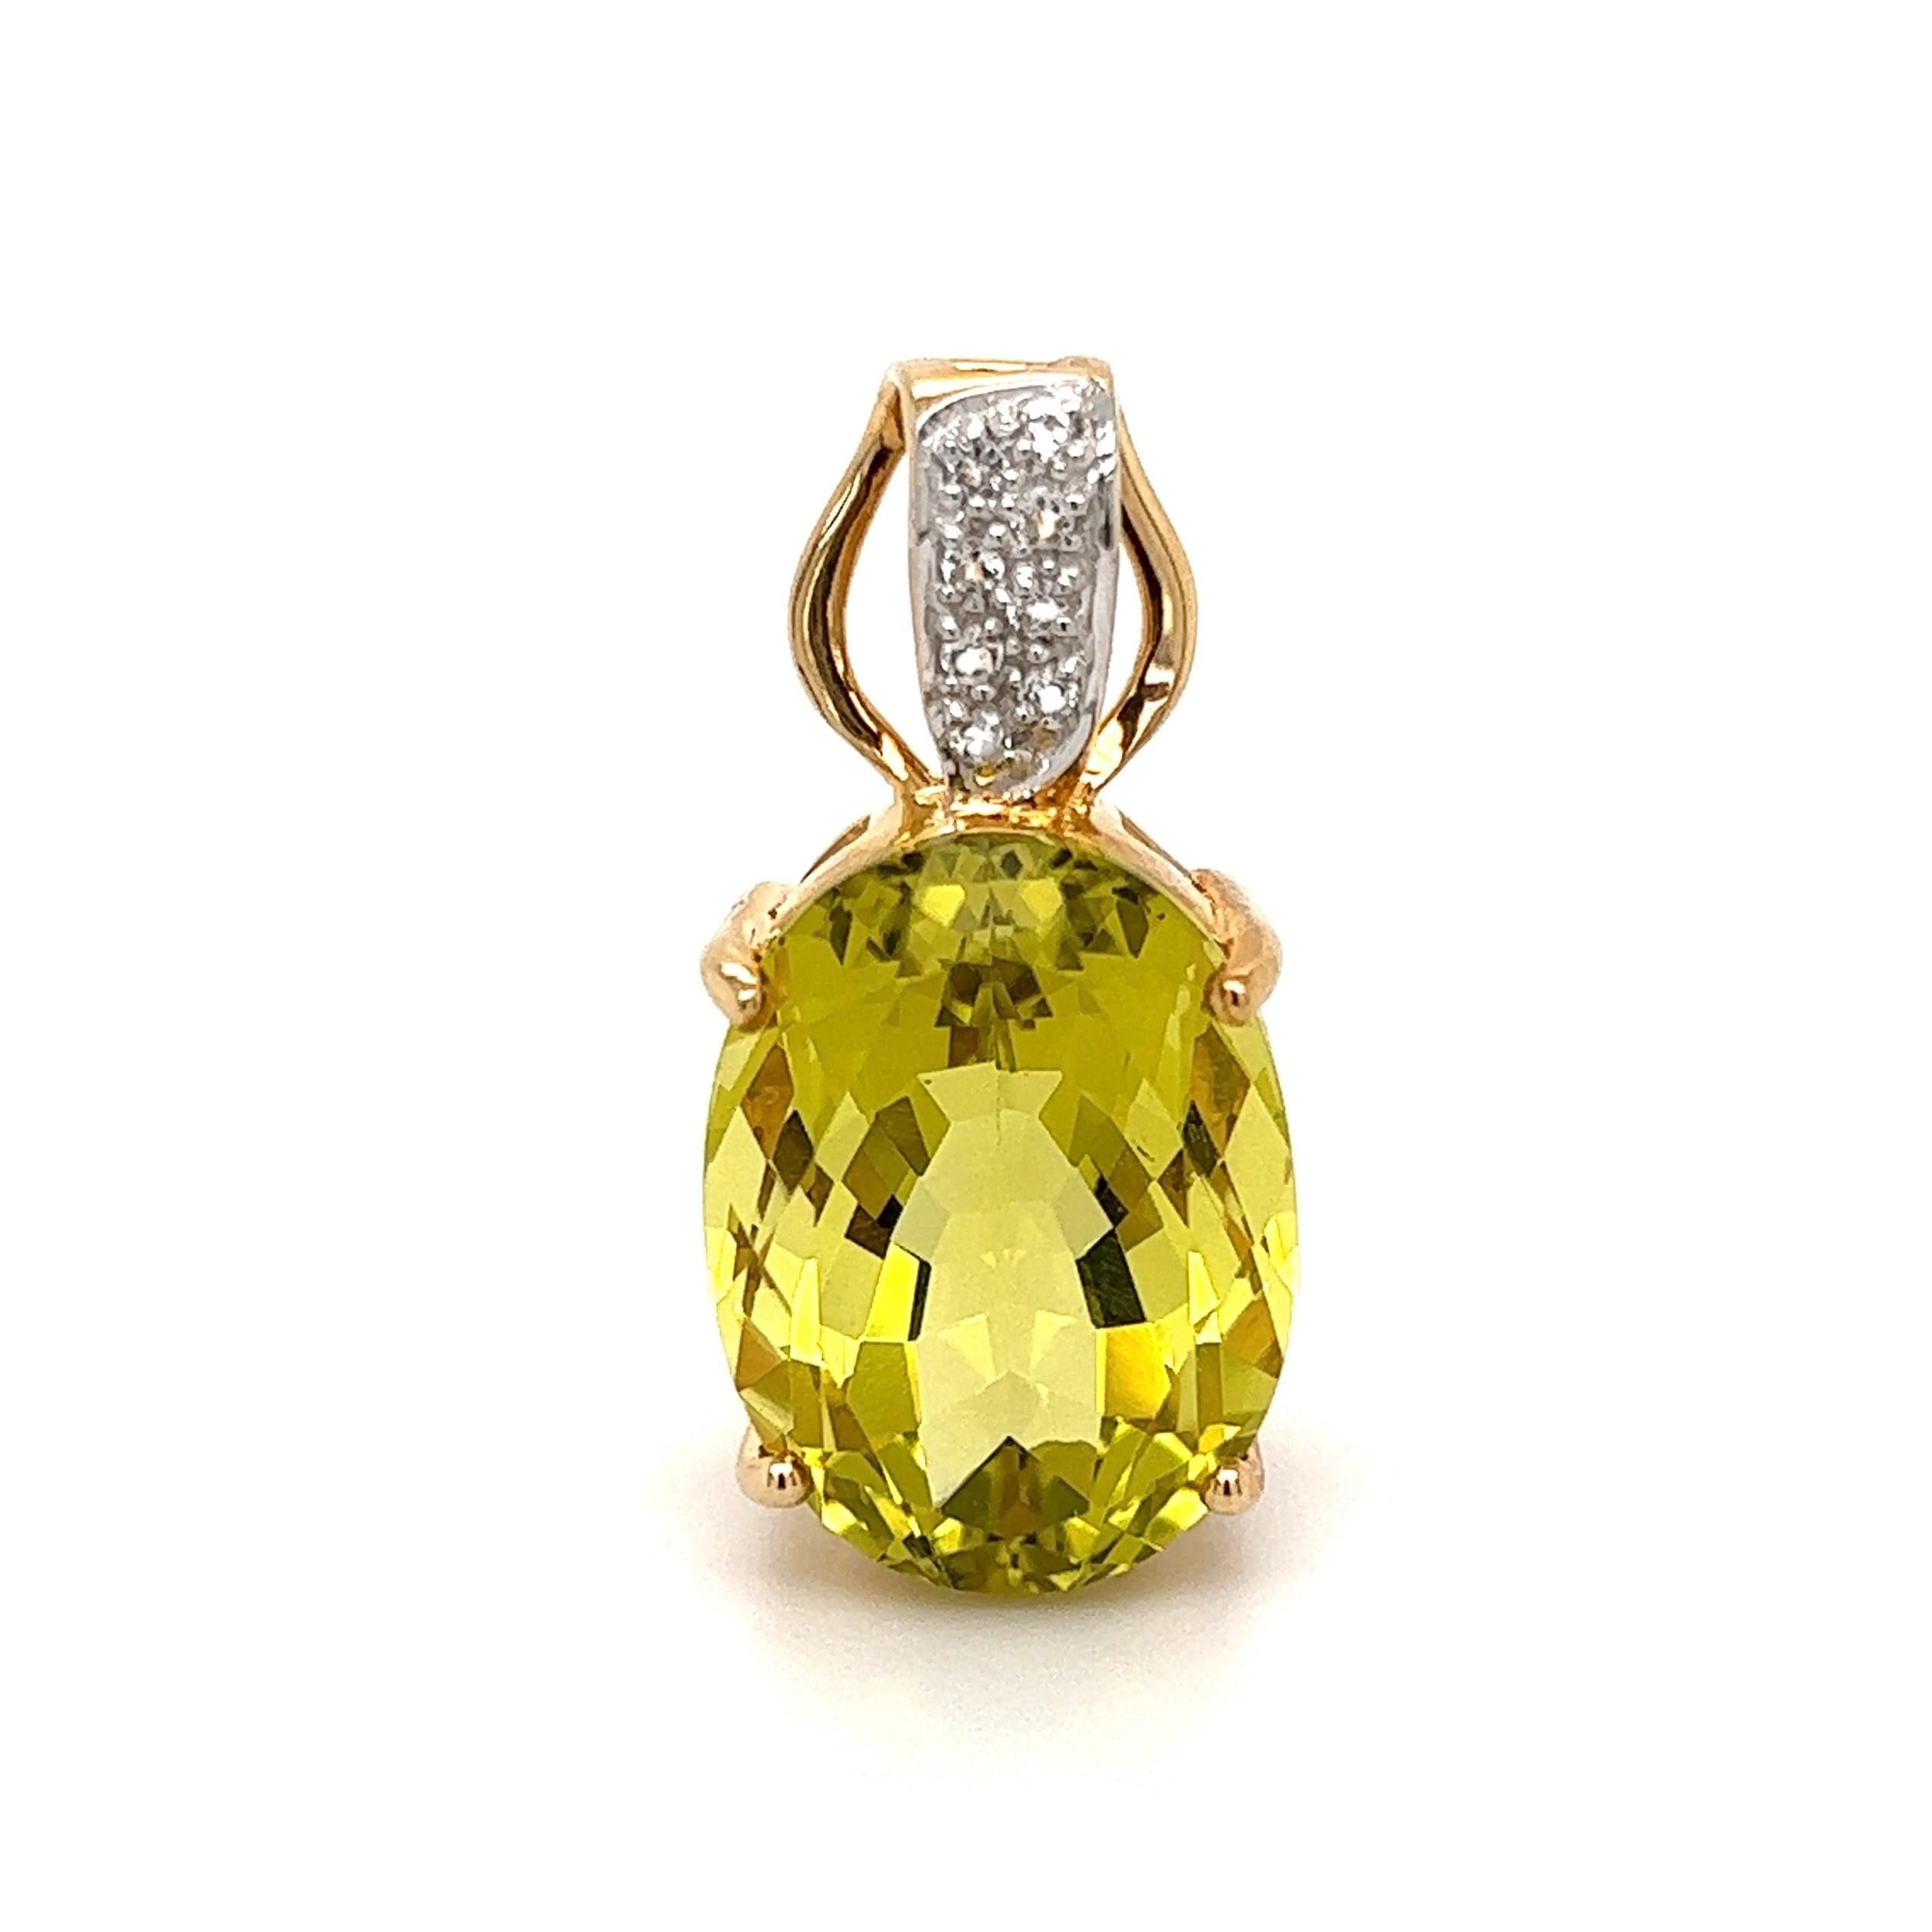 Simply Beautiful! Finely detailed Oval Lemon Citrine Gold Pendant. Securely Hand set with an Oval Lemon Citrine weighing approx. 20 Carat and bale set with White Topaz, approx. 0.18tcw. Measuring approx. 1.25” L. x 0.60” W x 0.50” D. Hand crafted